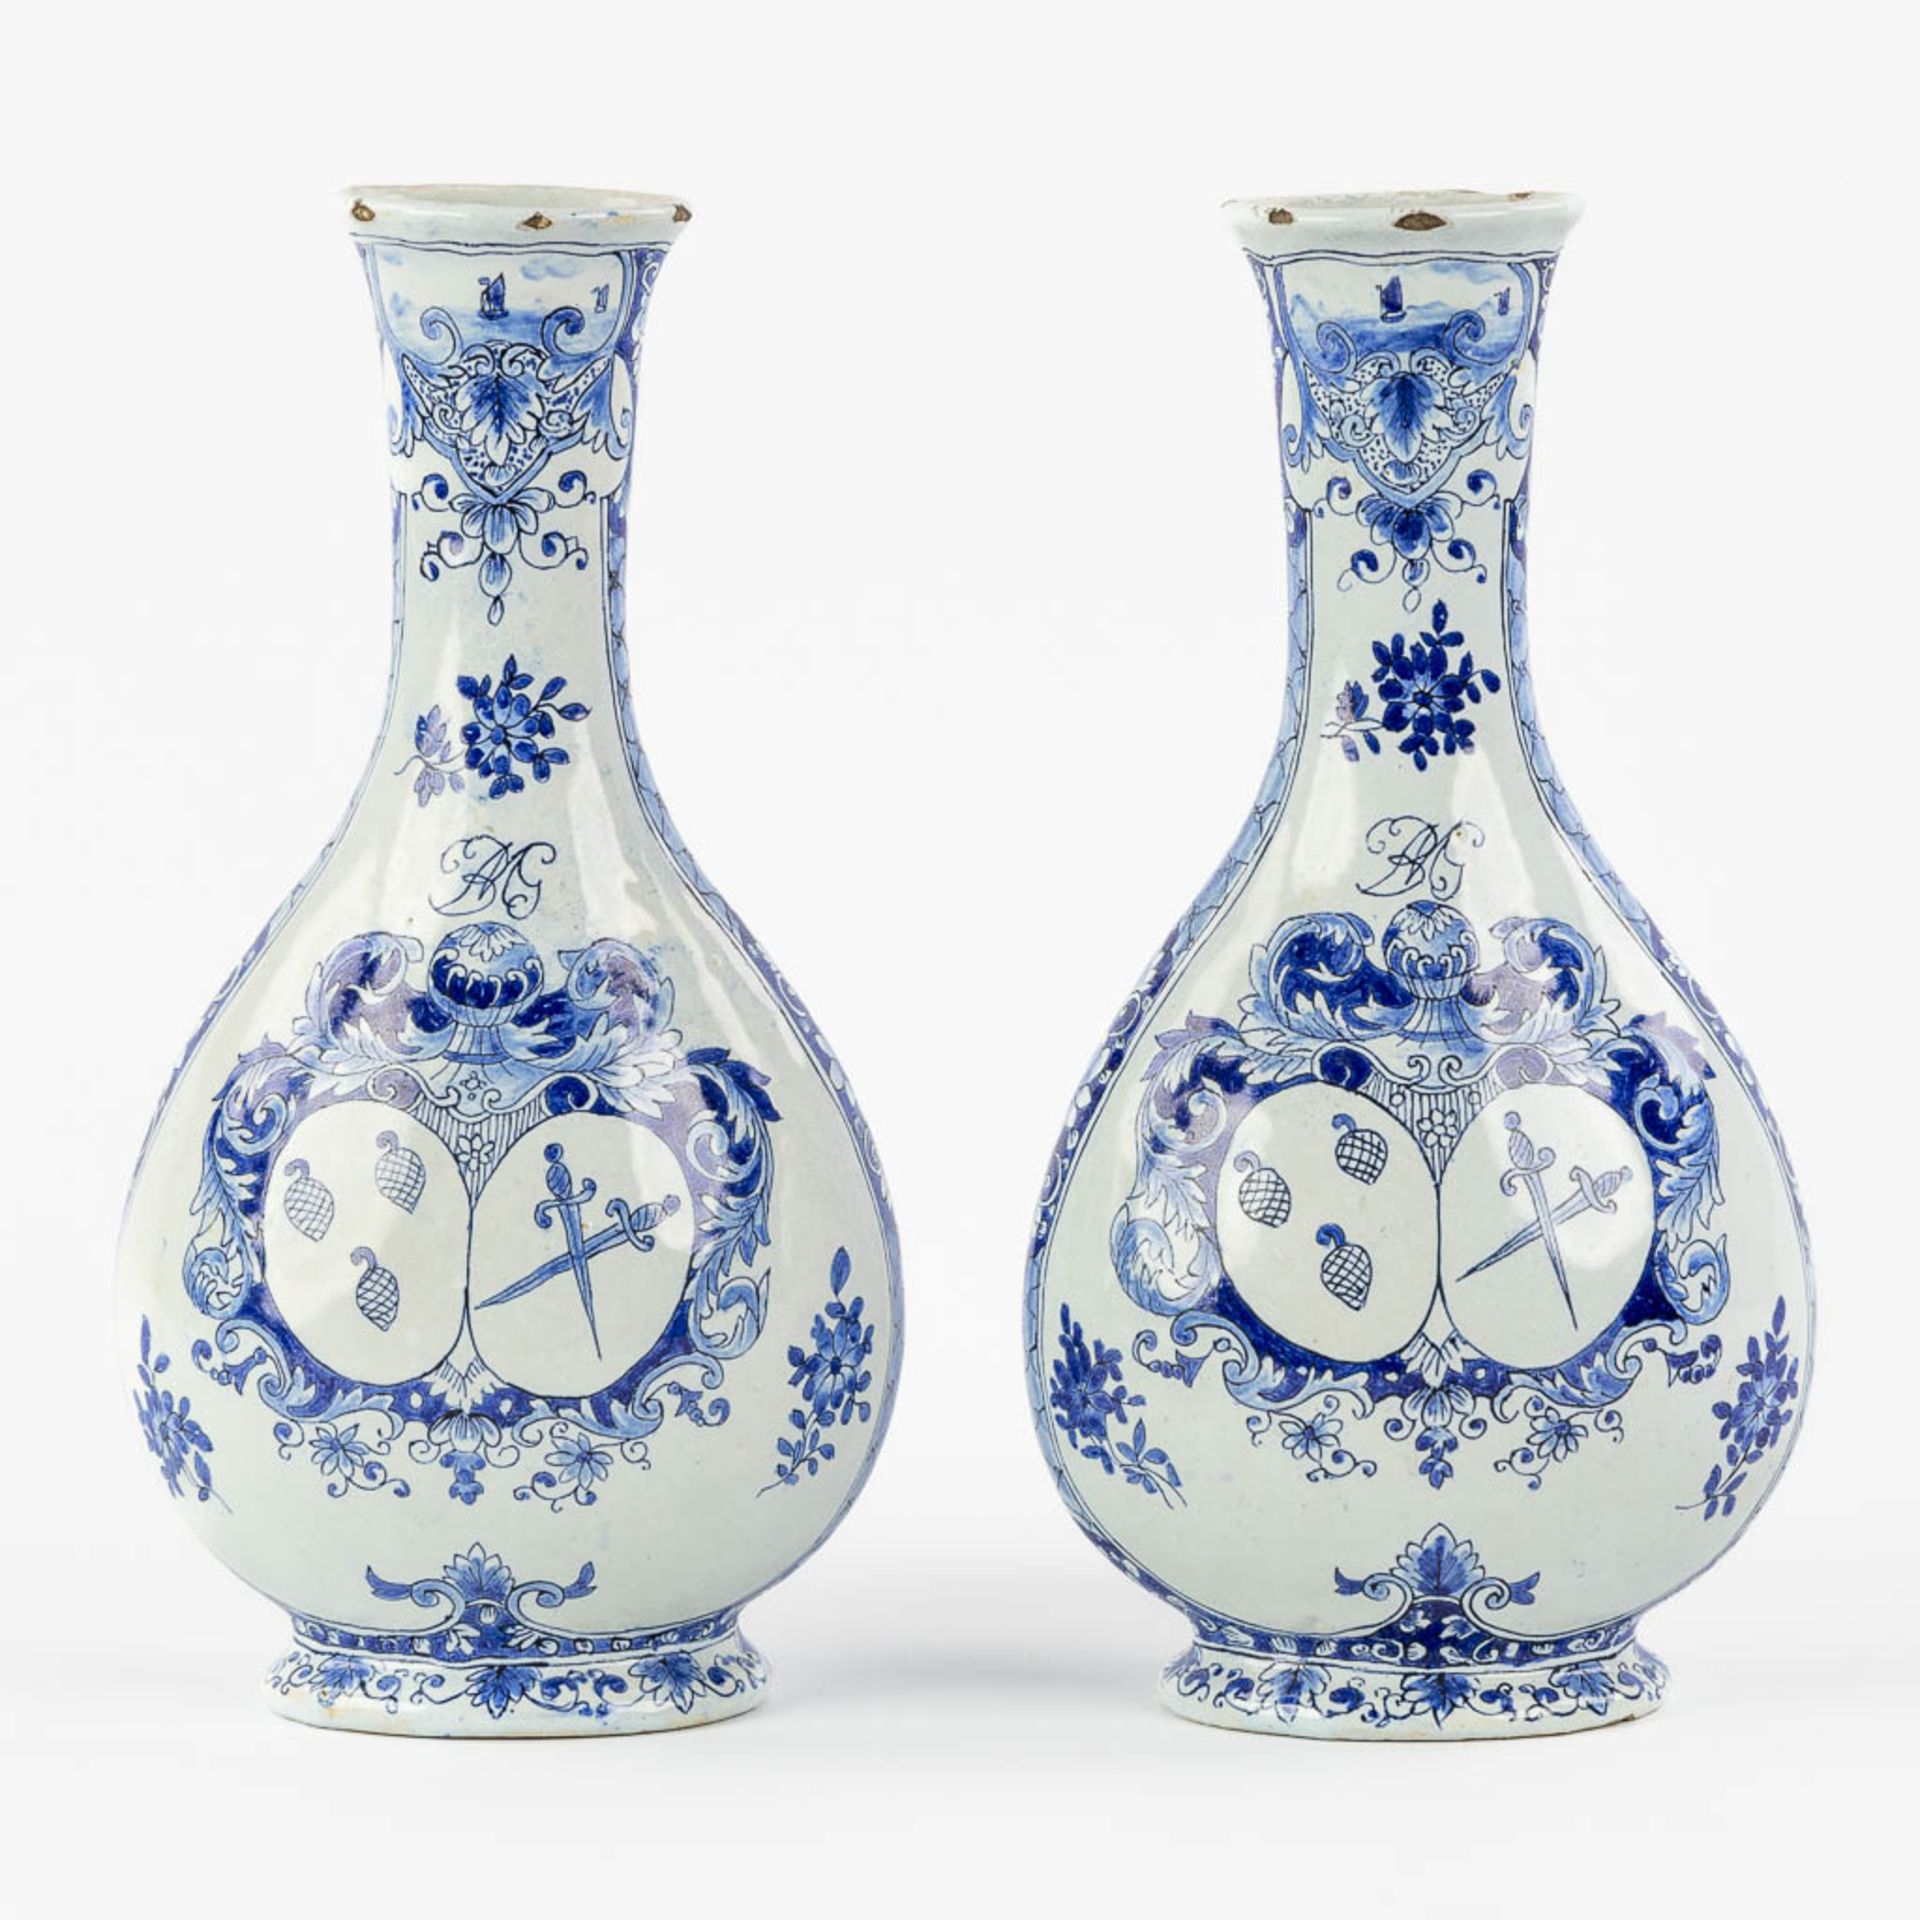 Geertrui Verstelle, Delft, a pair of vases with a landscape decor. Mid 18th C. (L:9 x W:14 x H:26,5 - Image 5 of 15